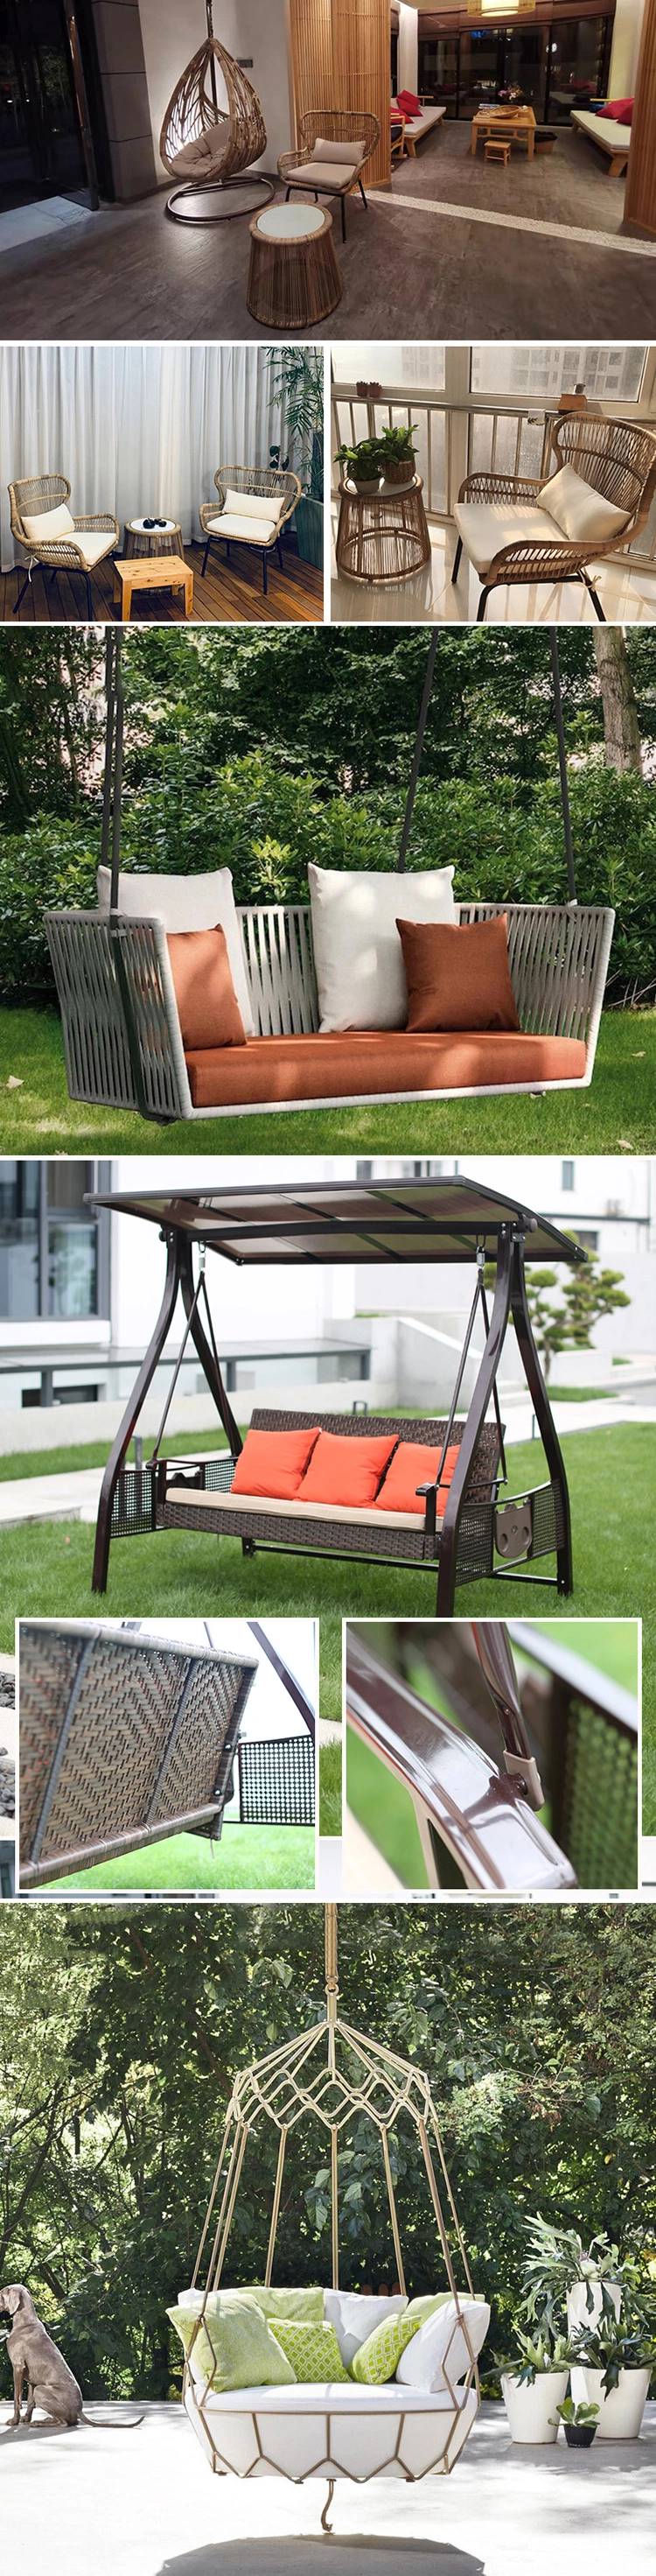 High Quality Outdoor Ratan Swing Chair Garden Furniture Hanging Single All Color Swing Chair